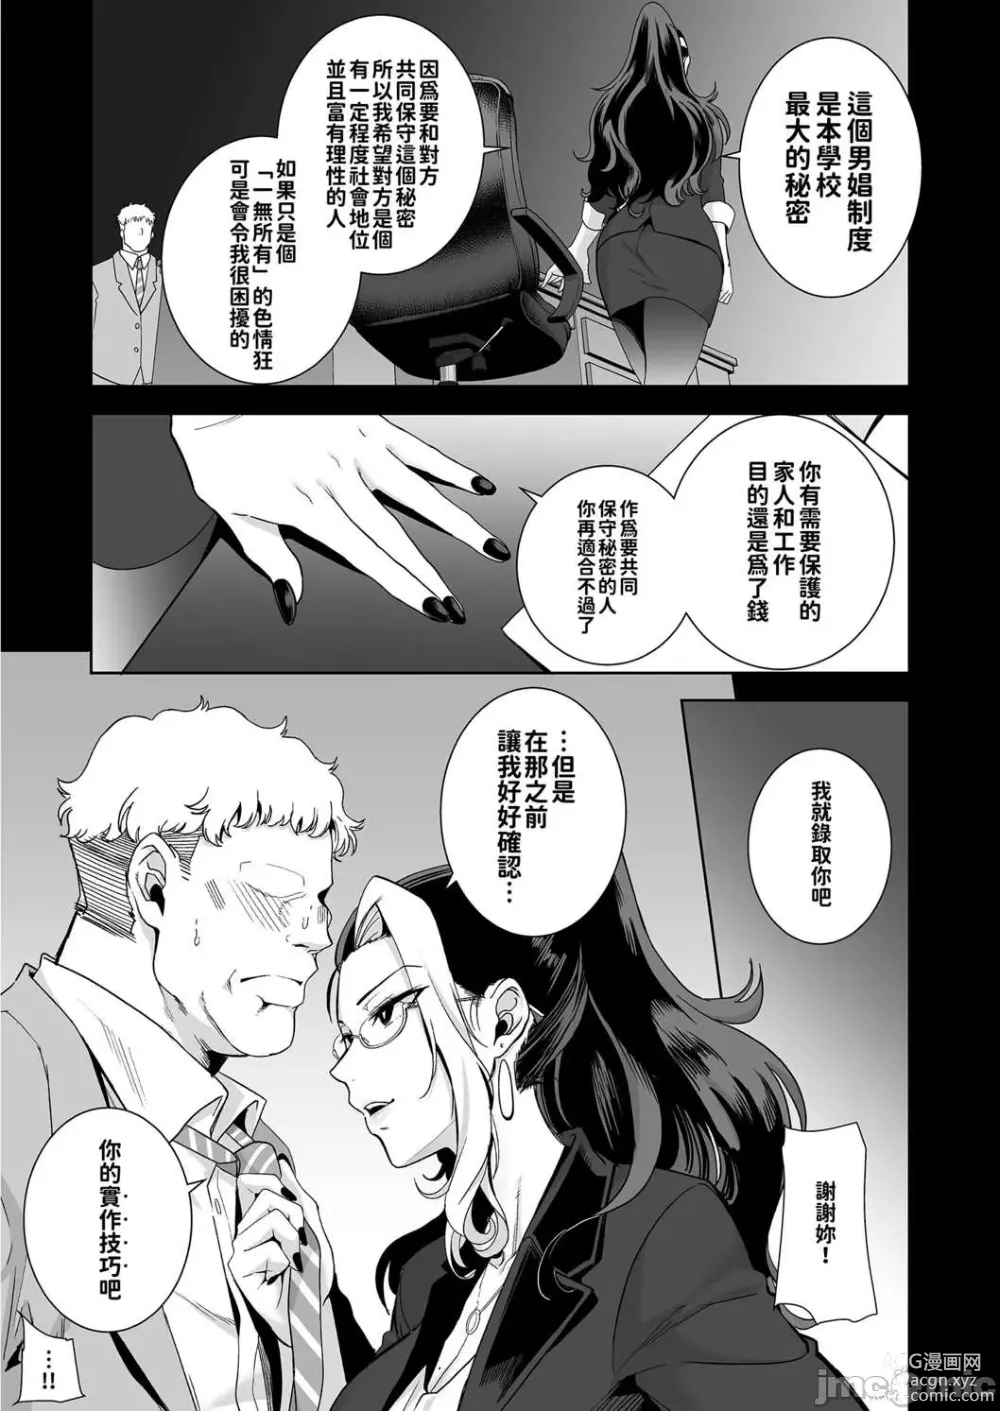 Page 5 of doujinshi 聖華女学院高等部公認竿おじさん 2